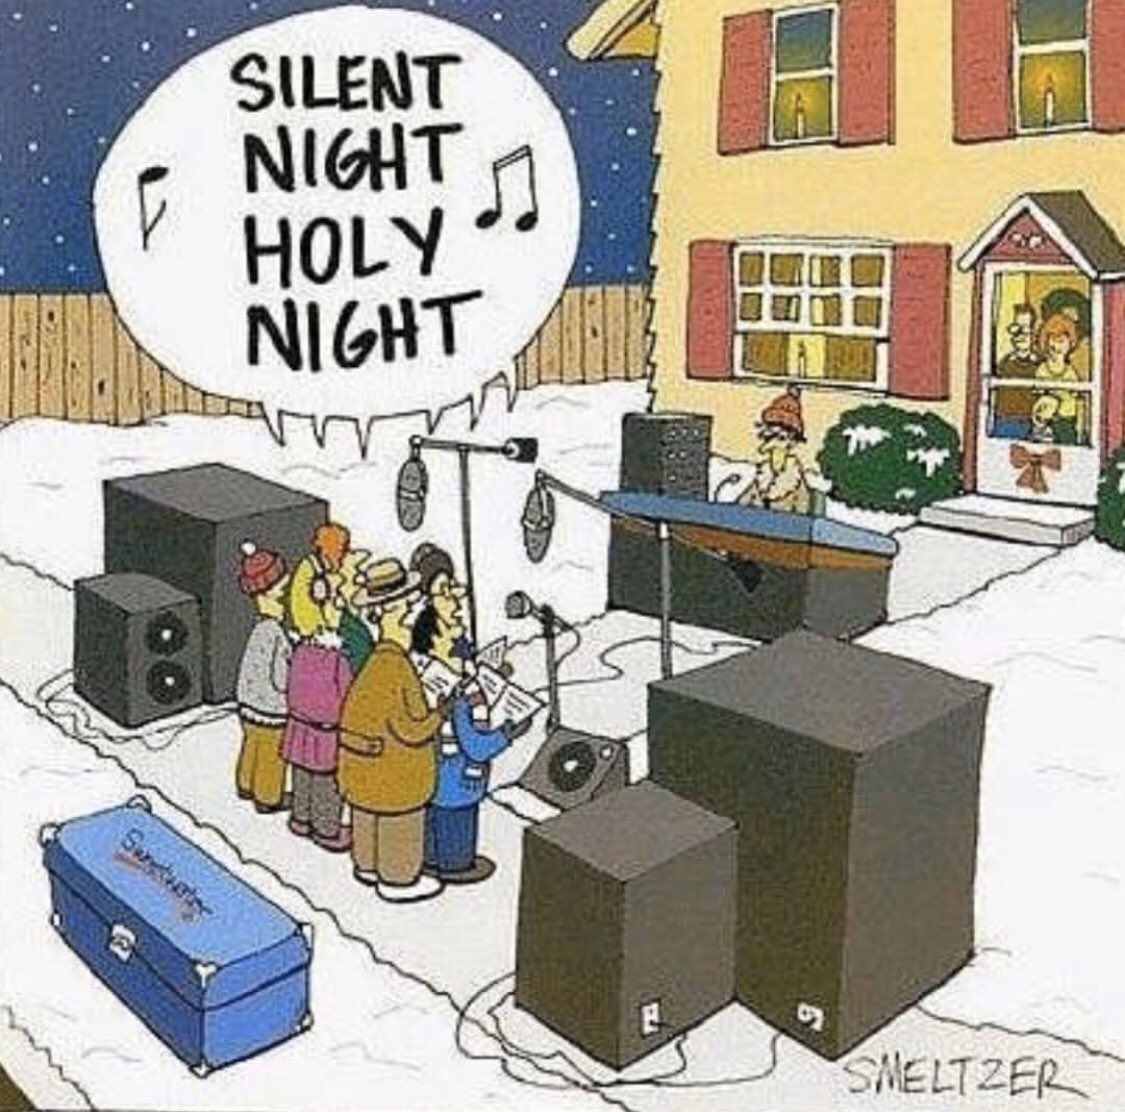 How are your Christmas Eve going so far?? Reply and let us know!#worshipleaderprobs #livesound #audioengineering #fohengineer #paoftheday